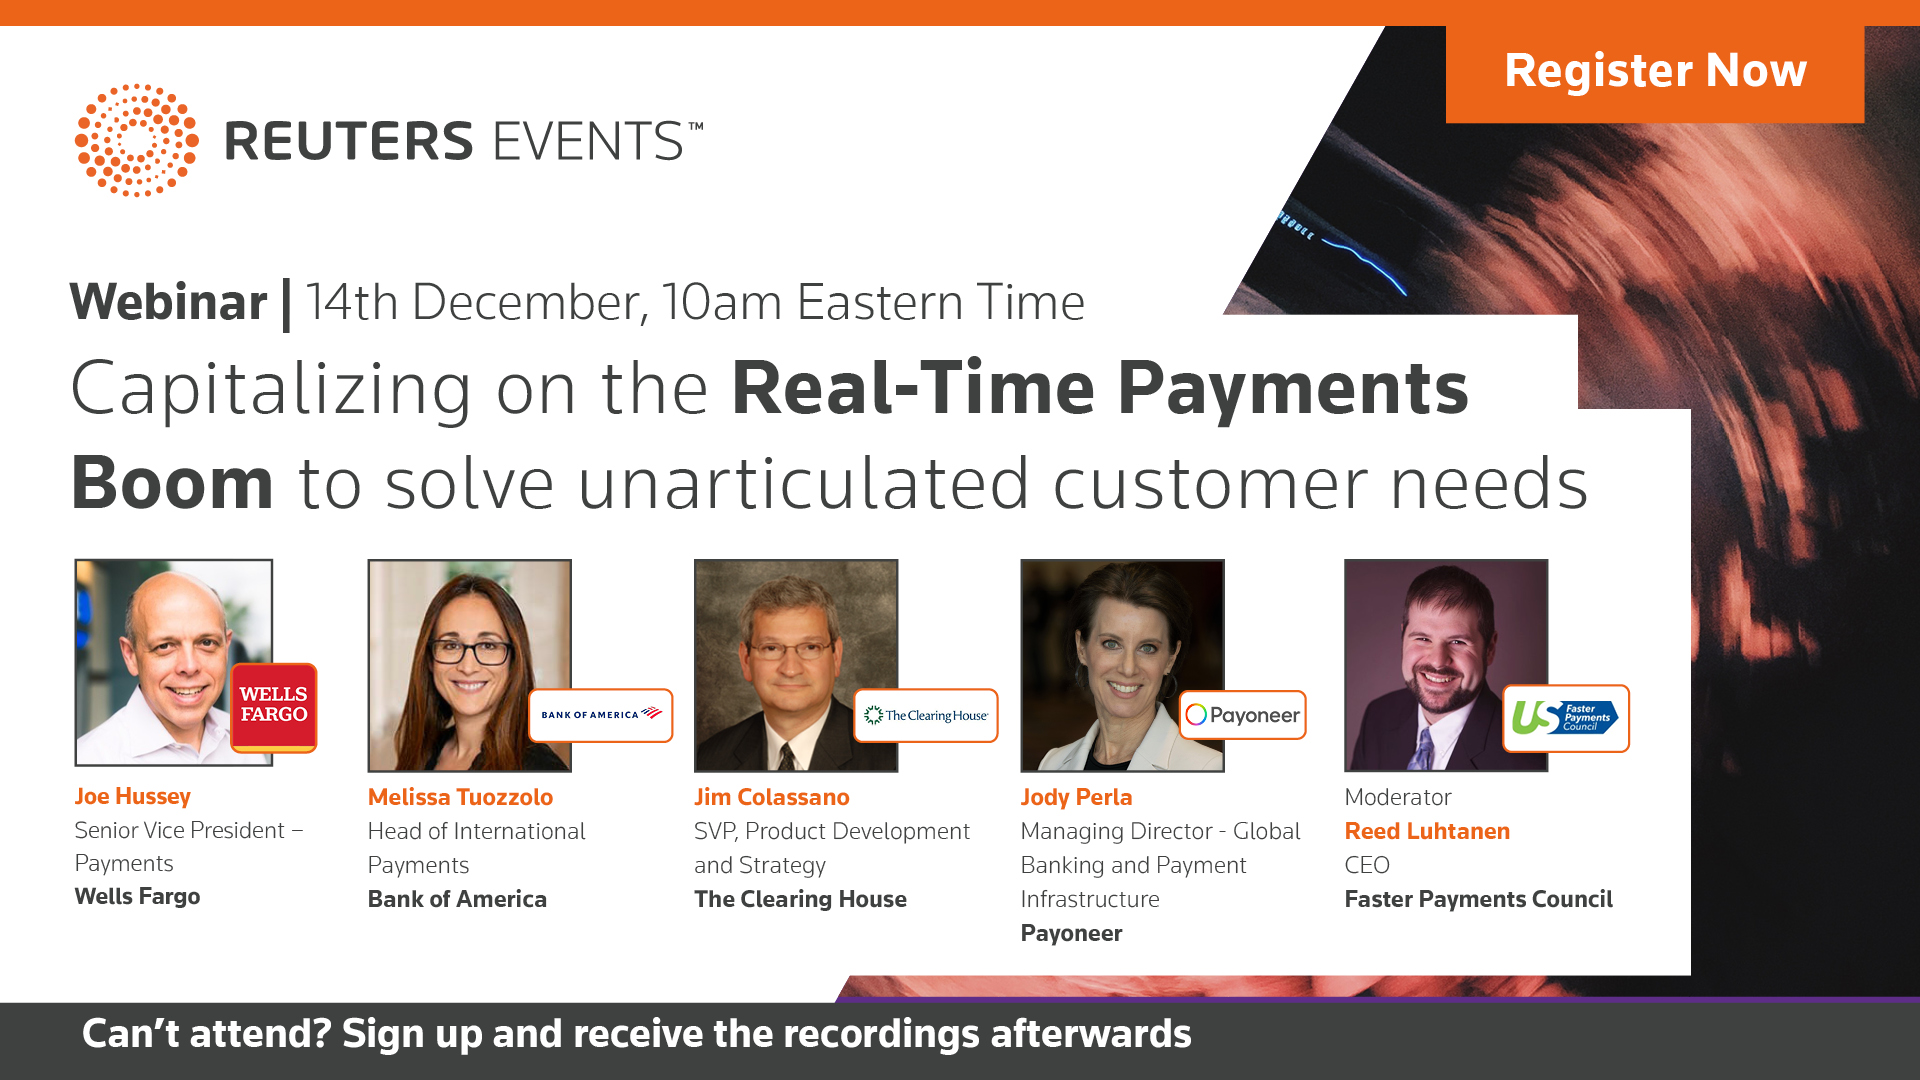 Join a panel of banking and fintech experts for an insightful discussion around issues related to Real-Time Payments in the United States.  organized by Reuters Events